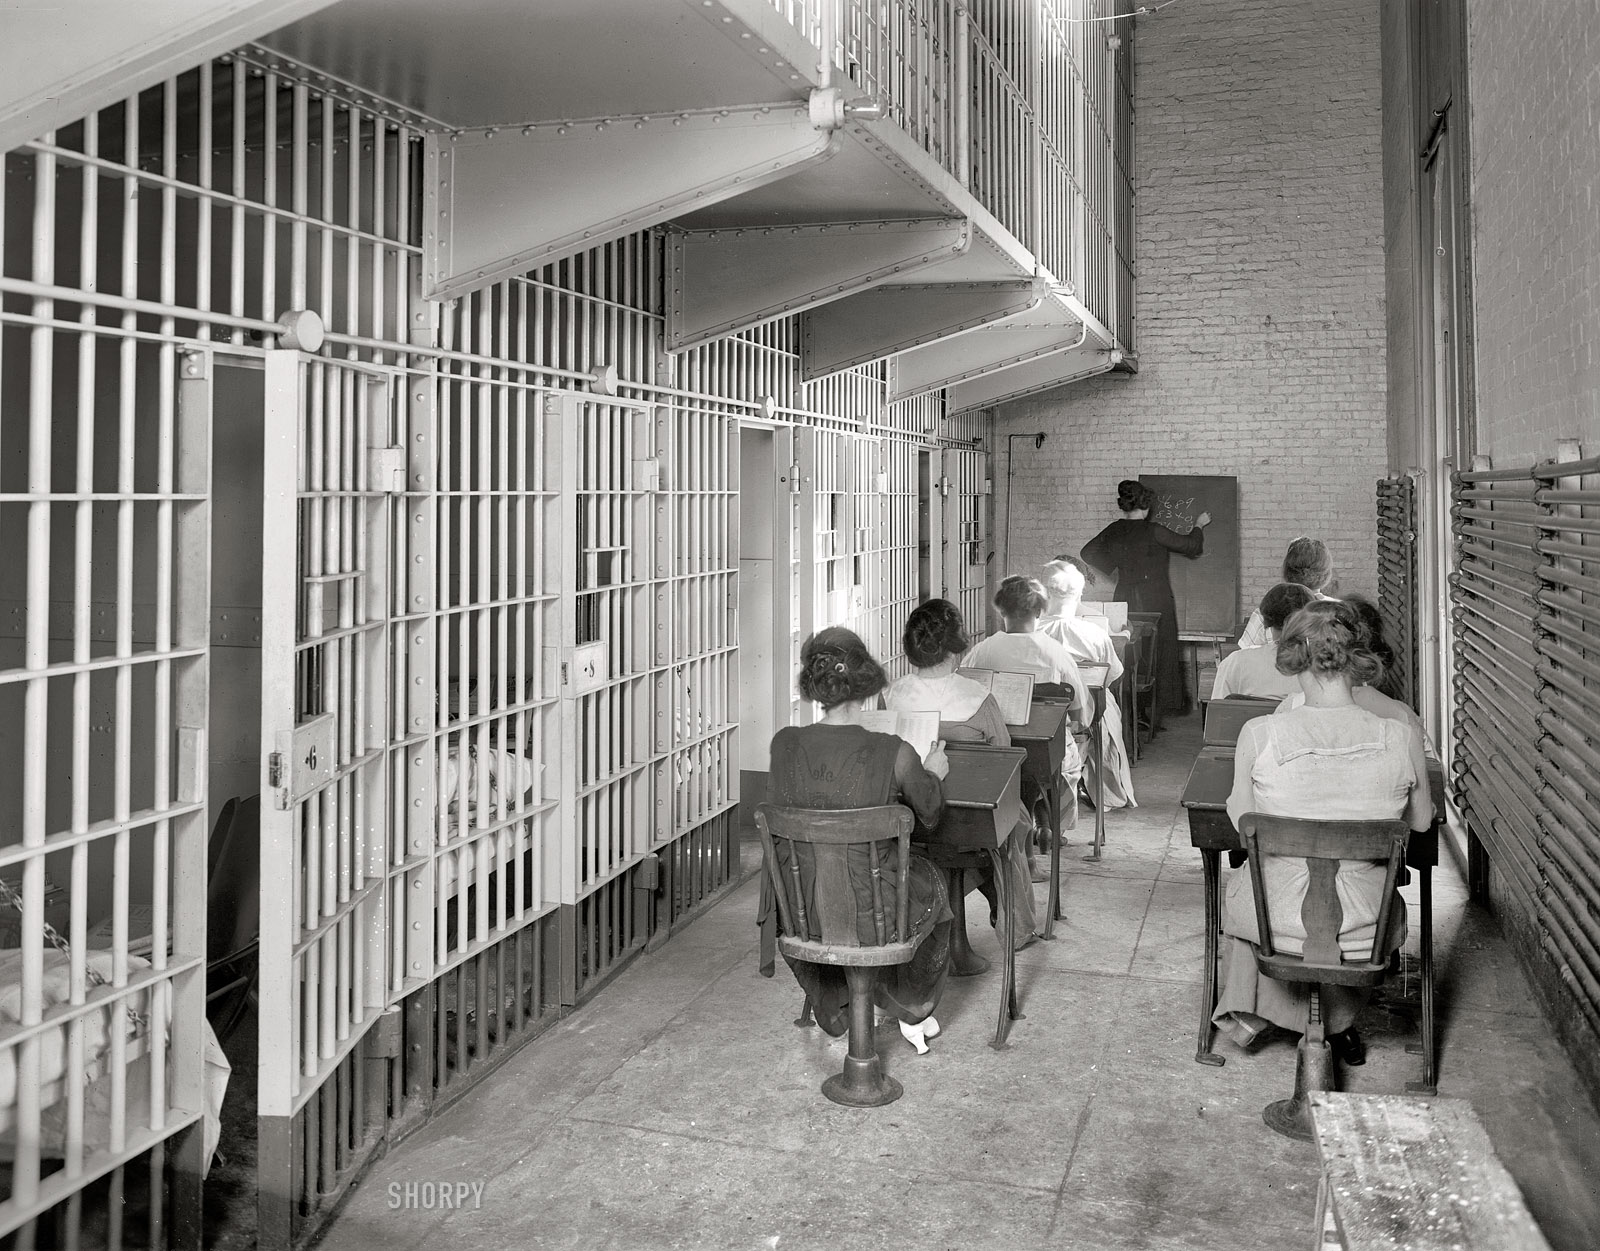 Washington, D.C., circa 1920. "Jail, Women's School." Alternate title: "Complete this sentence." National Photo Co. Collection glass negative. View full size.